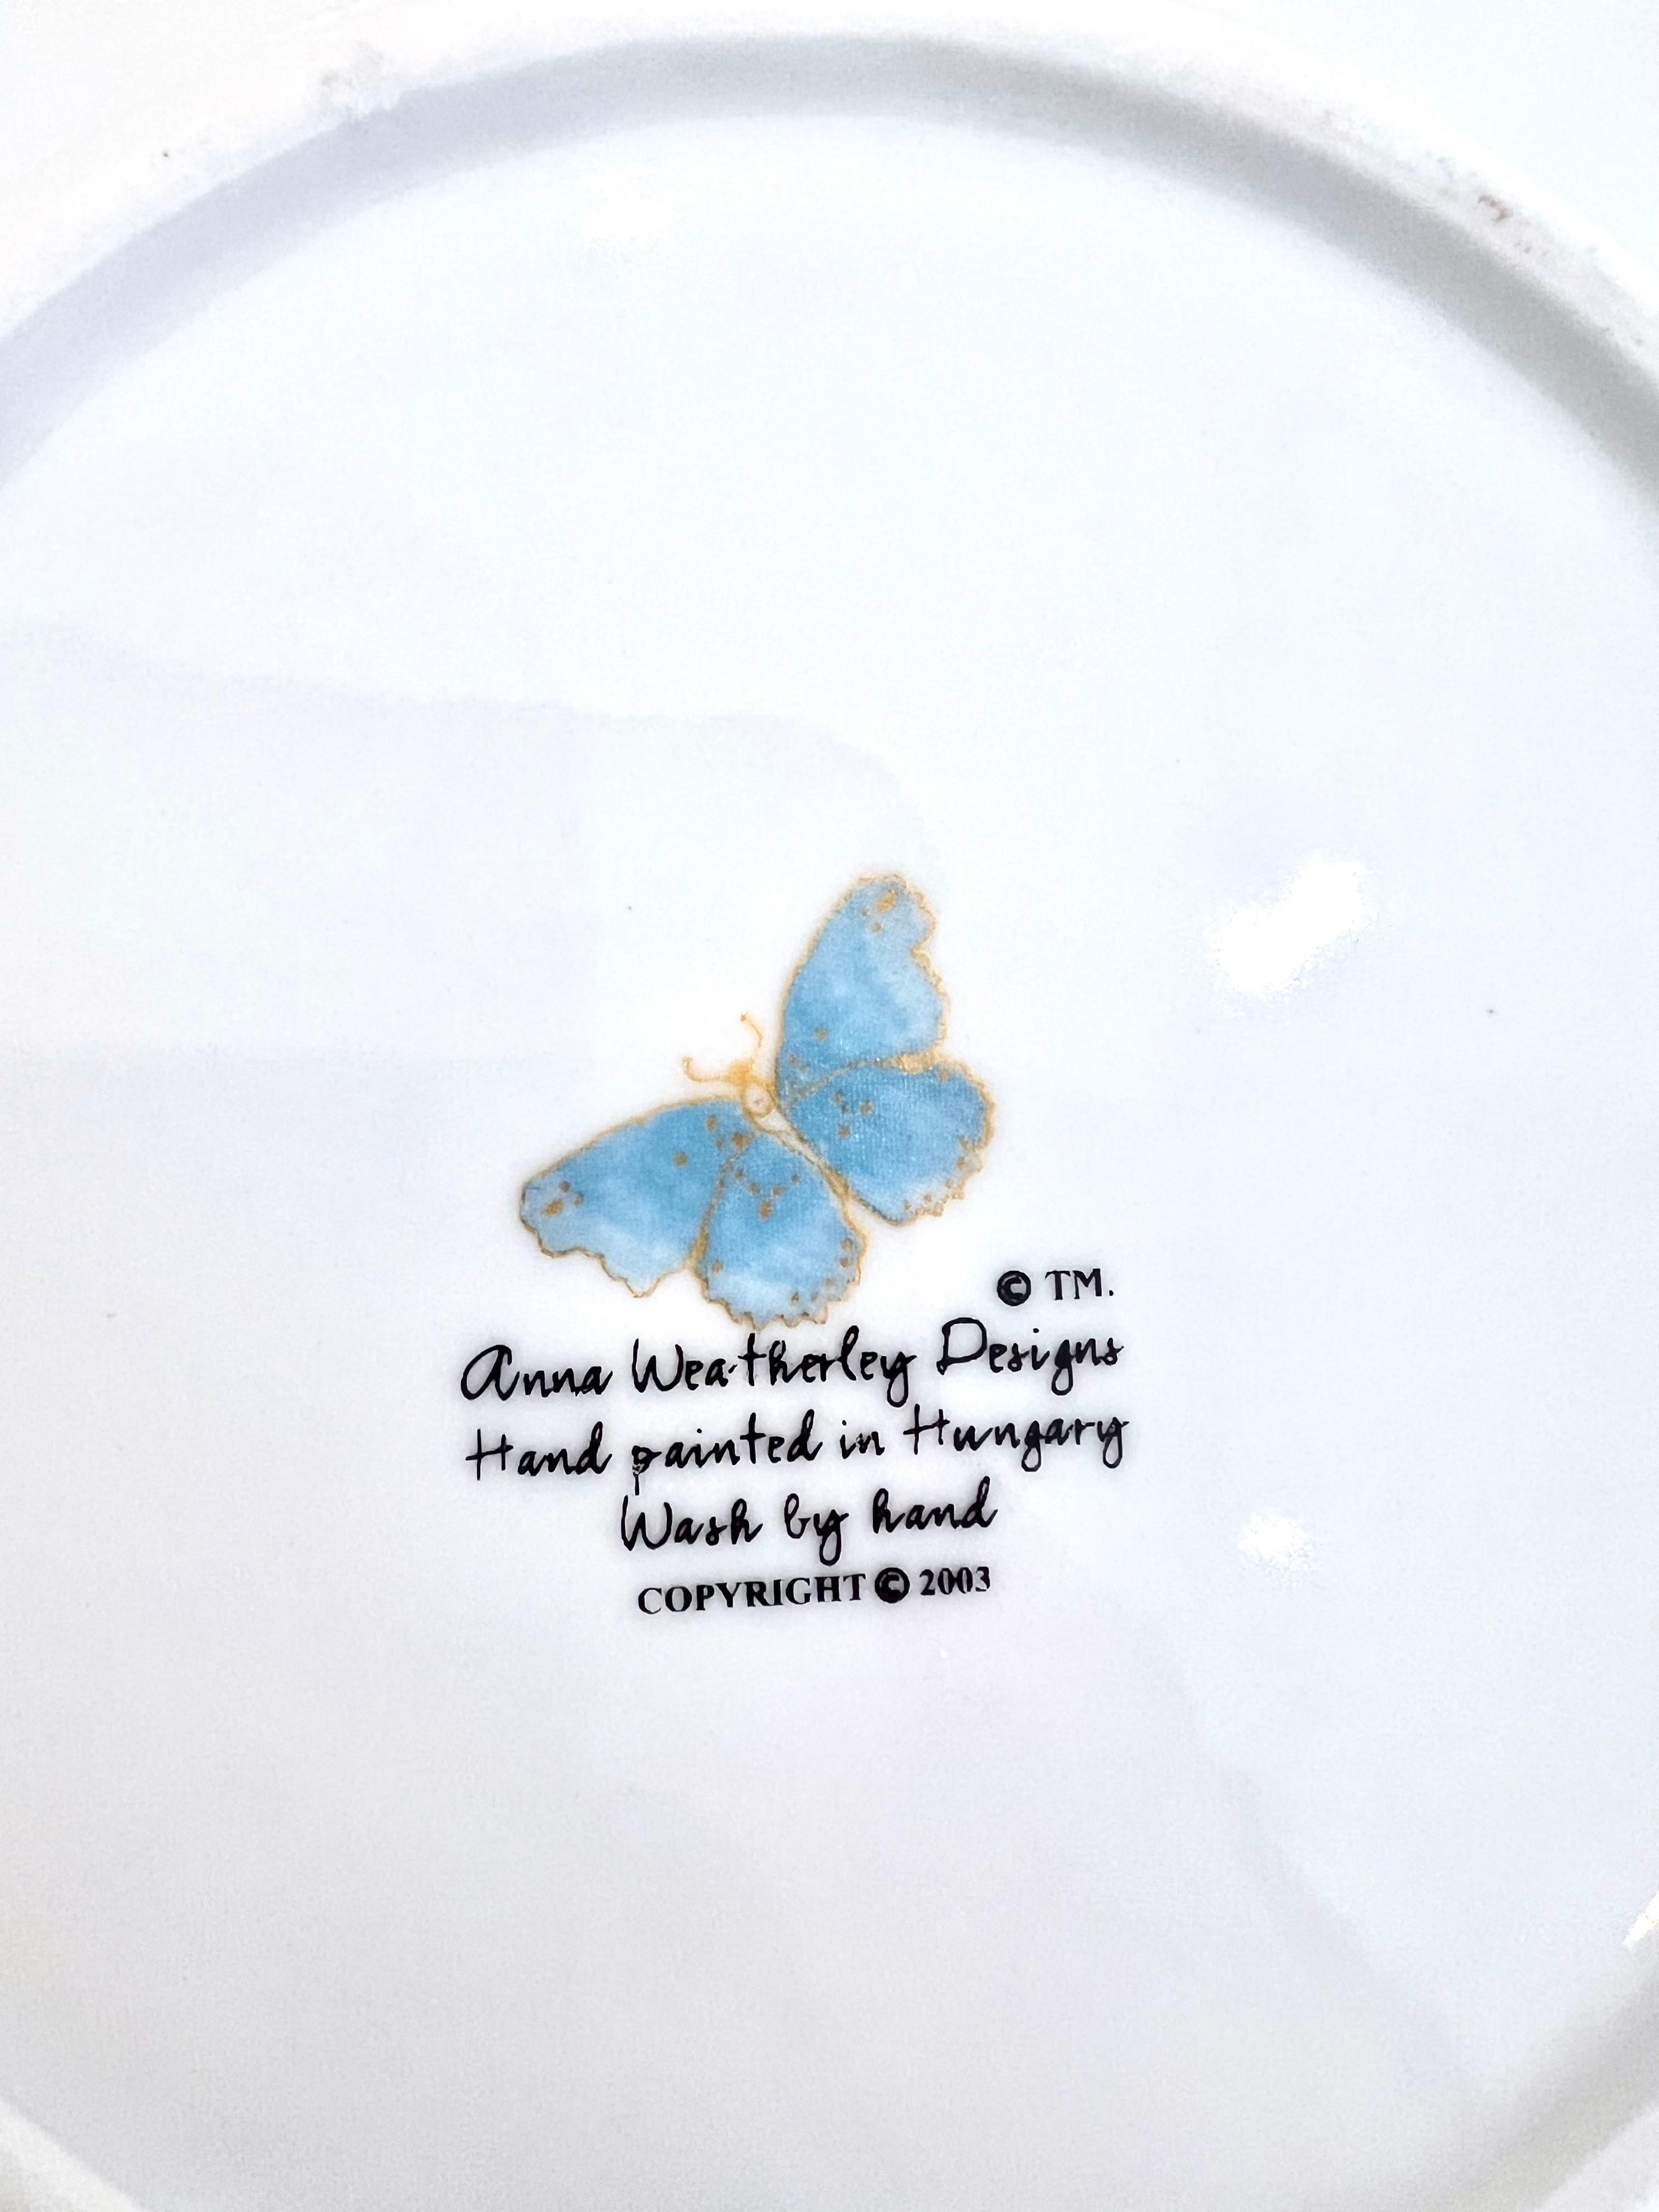 Contemporary Anna Weatherley - Hand Painted Porcelain Plates For Sale